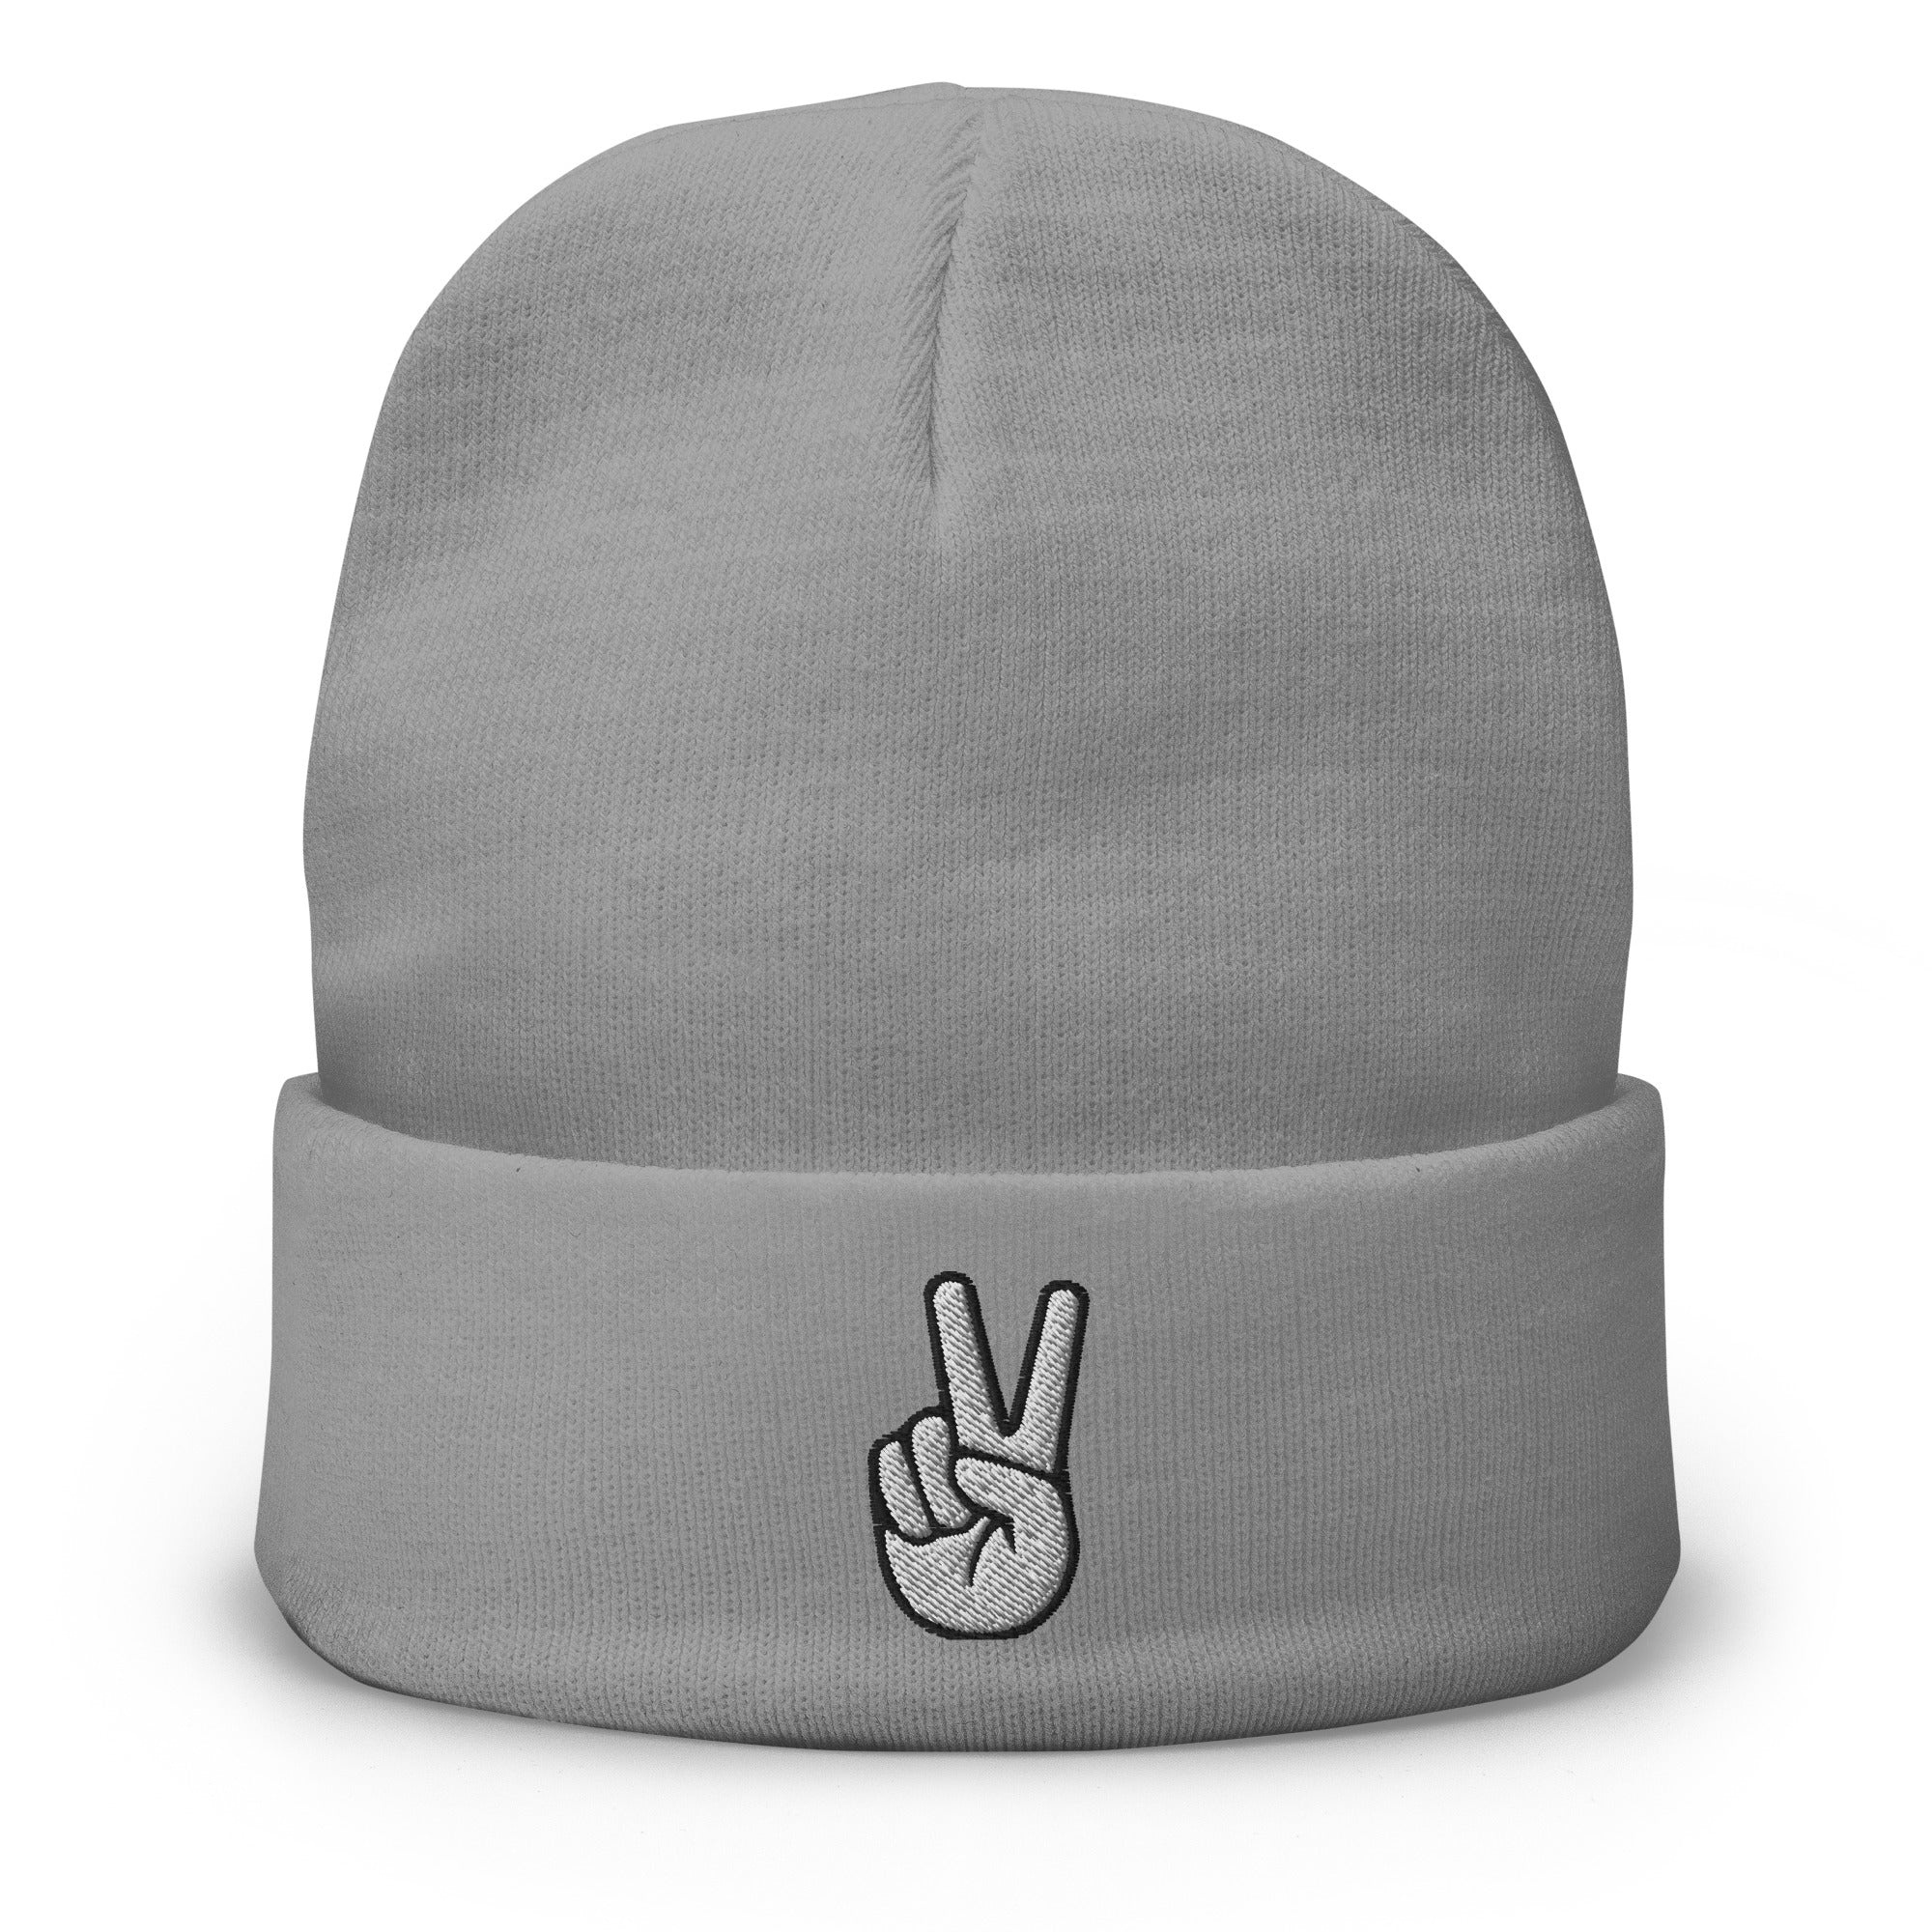 The V Sign for Victory Hand Gesture Embroidered Cuff Beanie